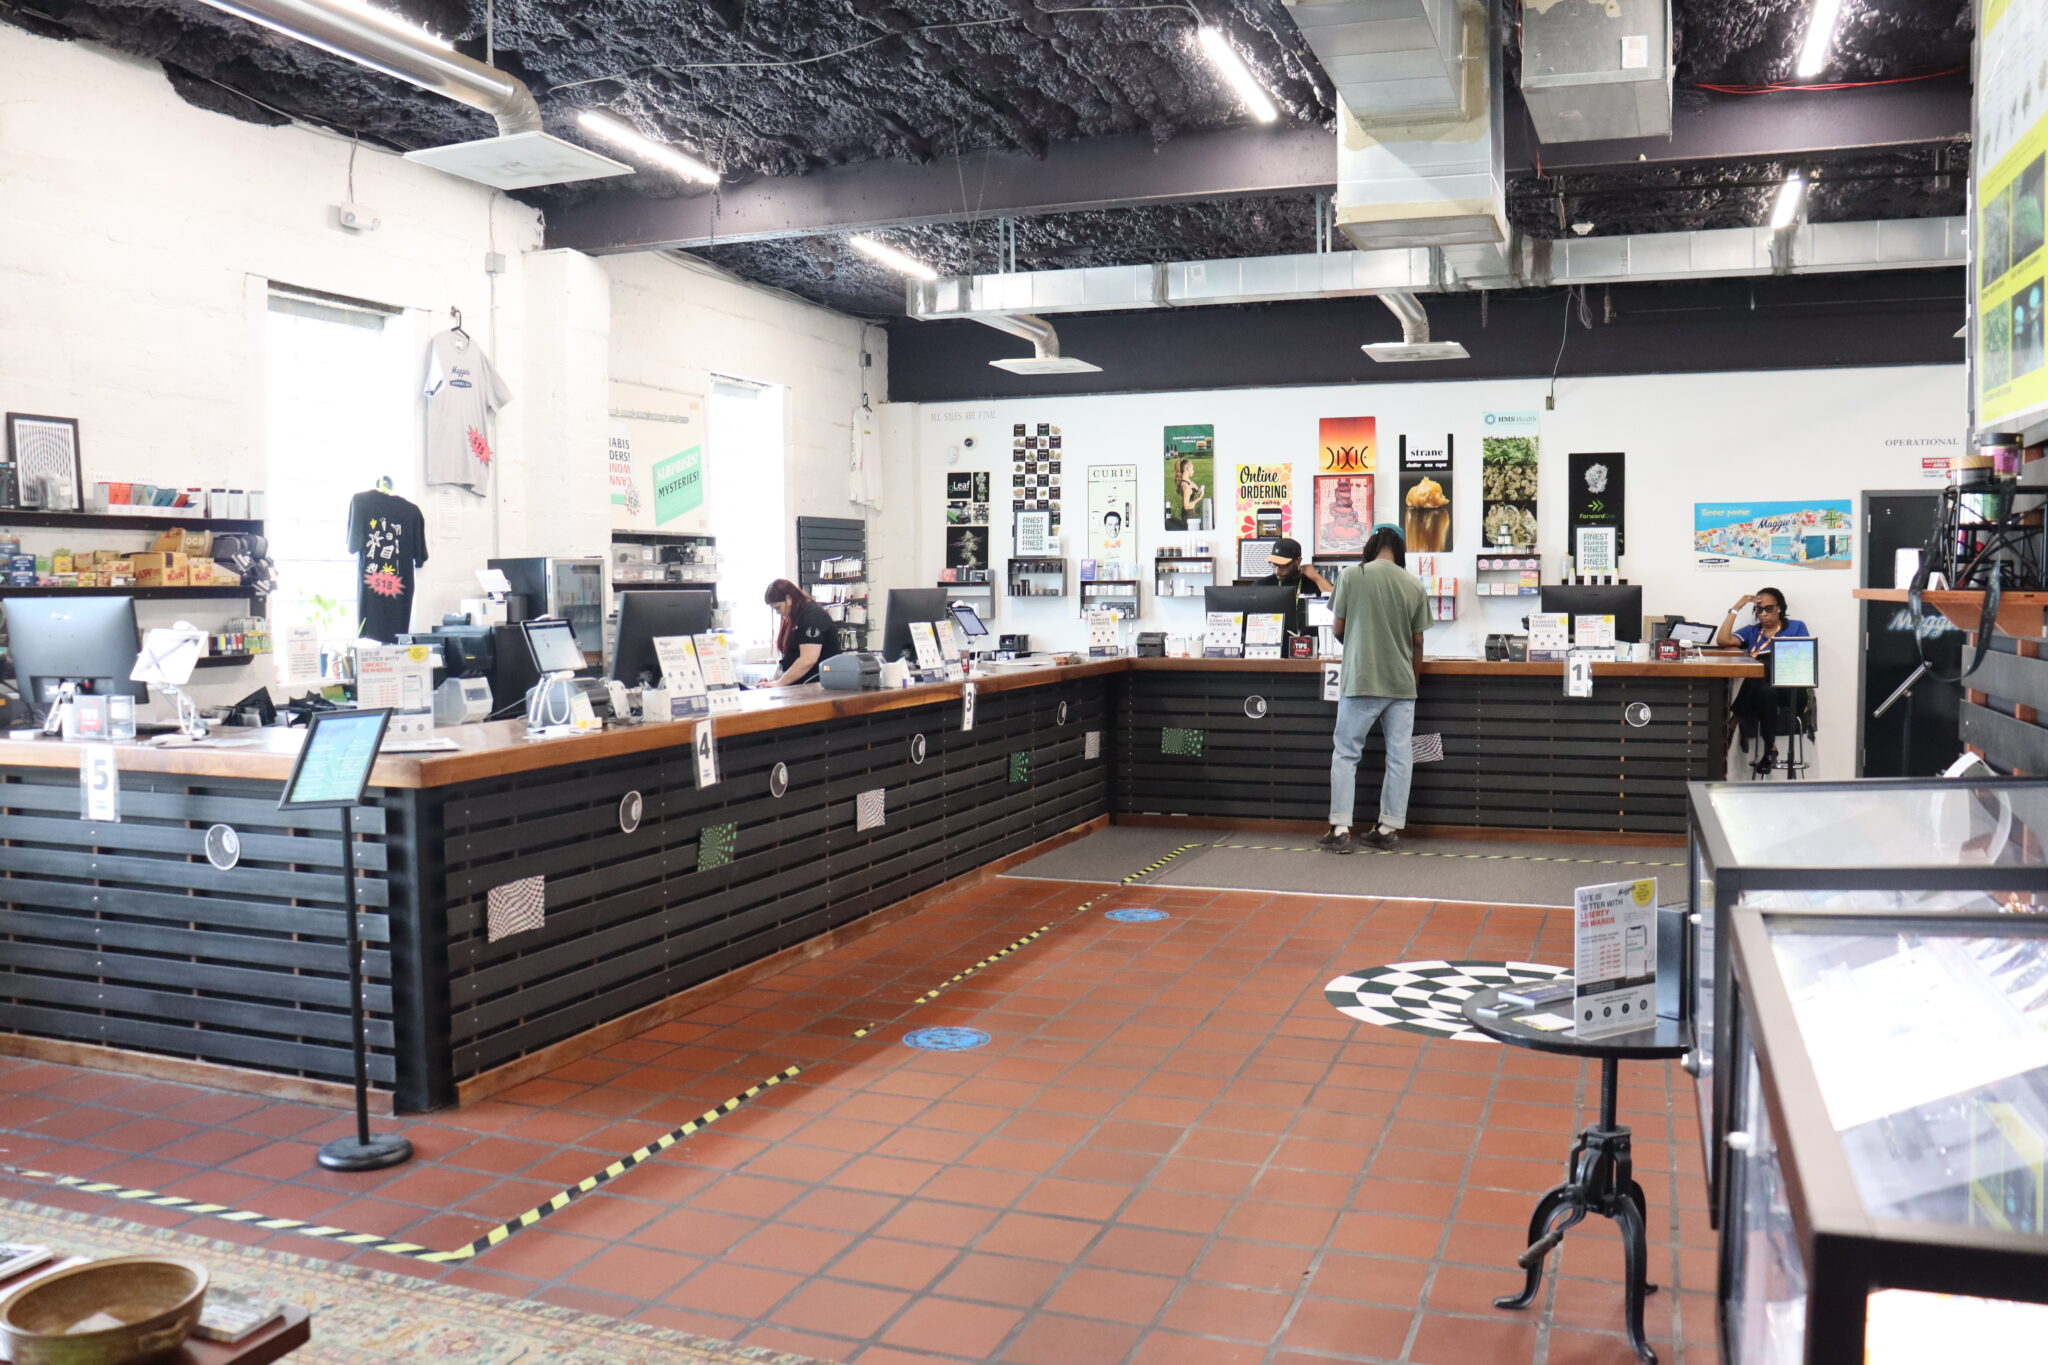 Liberty Baltimore dispensary interior product displays and counters